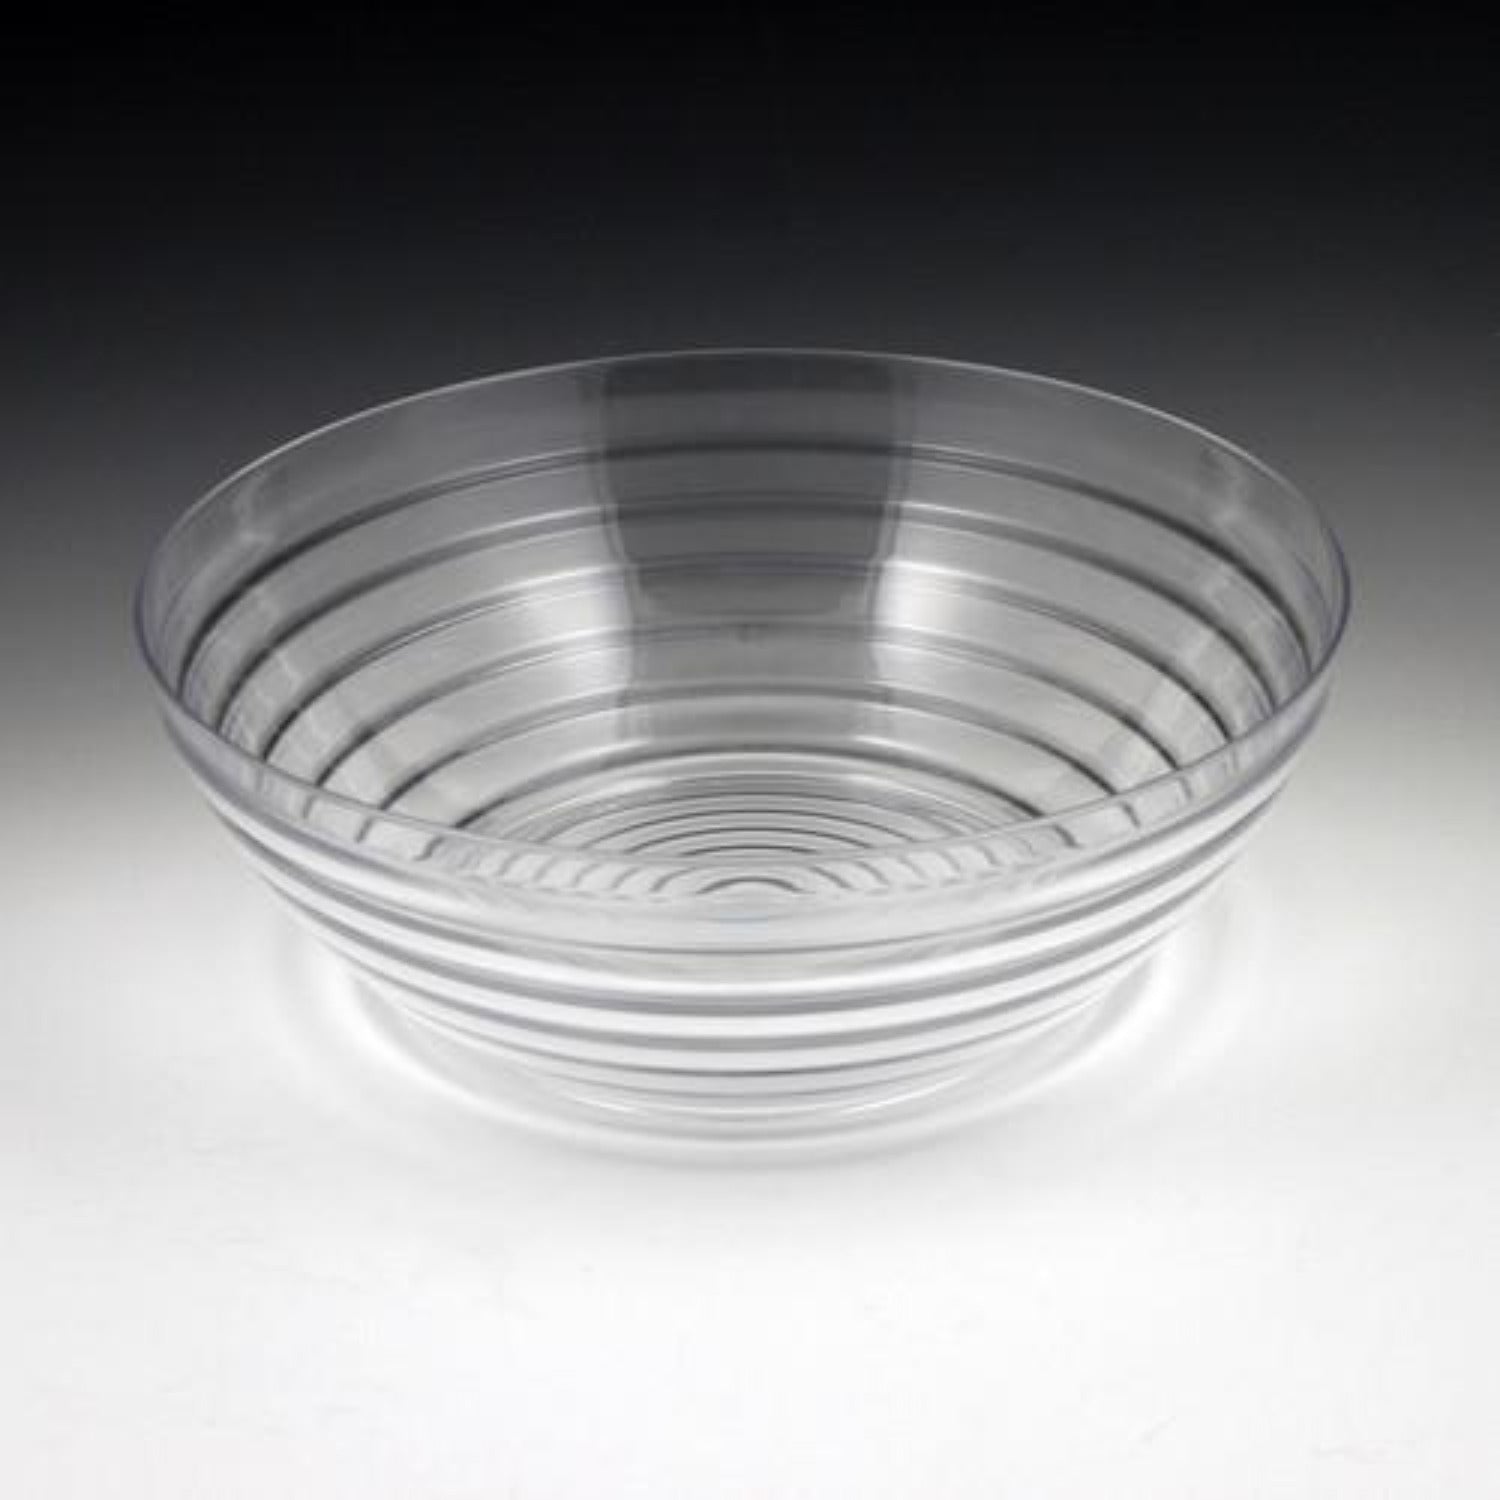 Large Plastic Round Clear Ringed Serving Bowl 11" Extra heavy weight Serverware Party Dimensions   